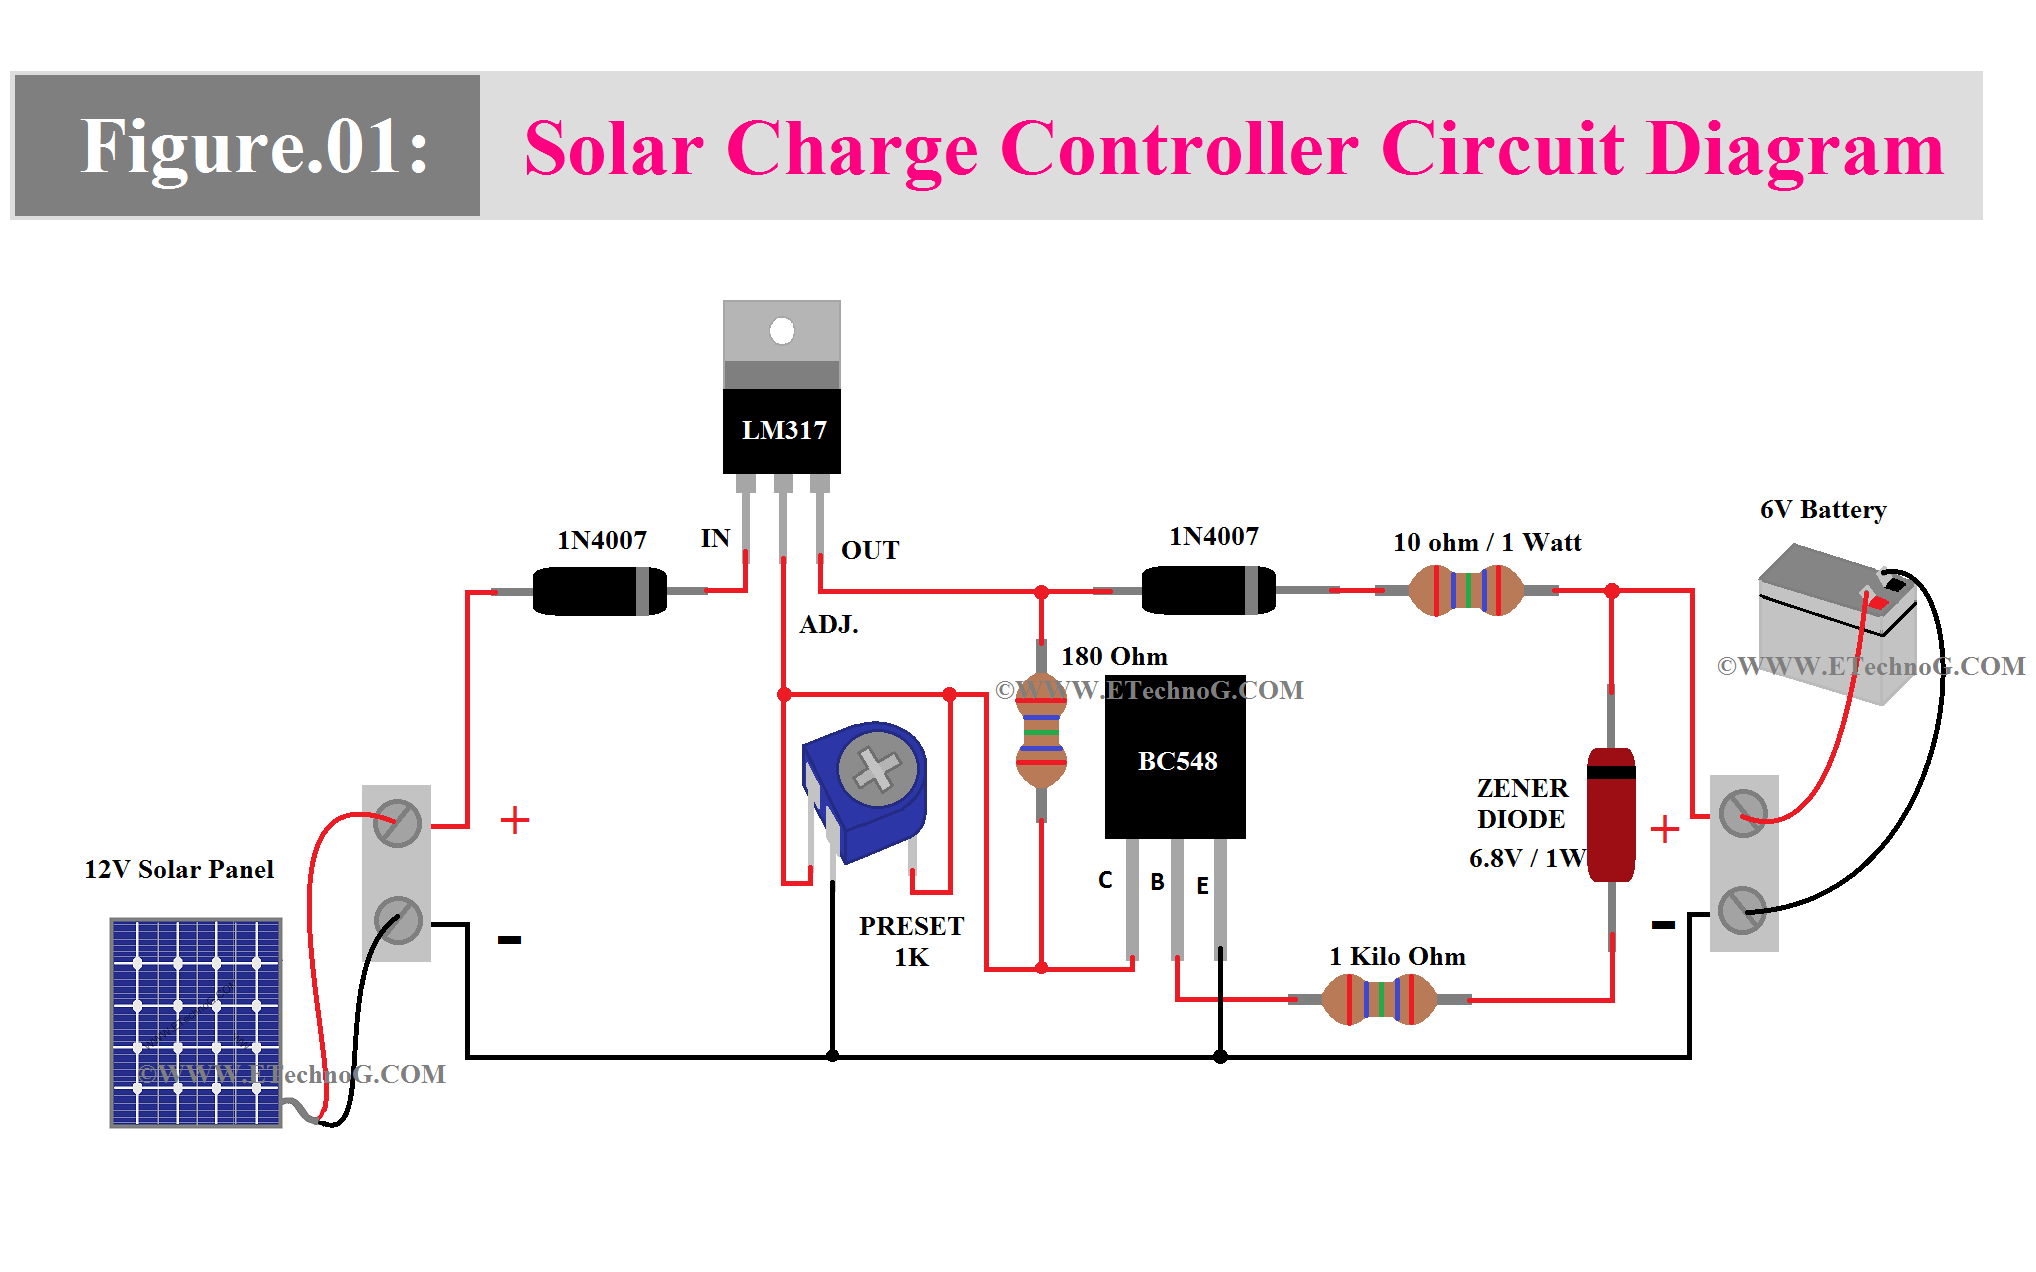 Circuit Diagram of Solar Charge Controller